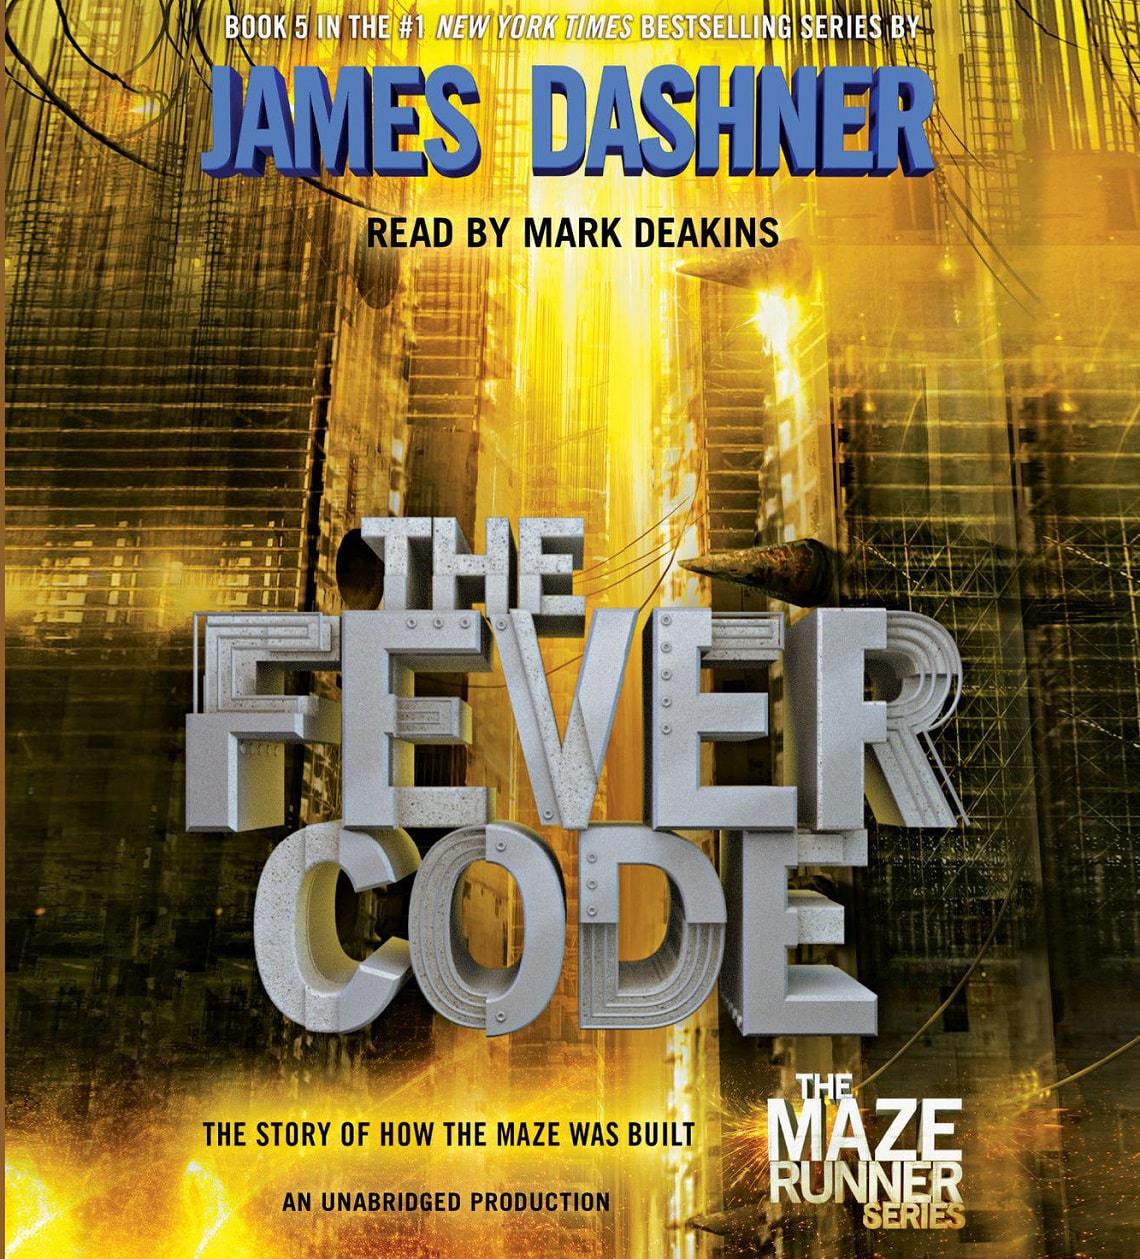 The Fever Code Audiobook Free Download and Listen